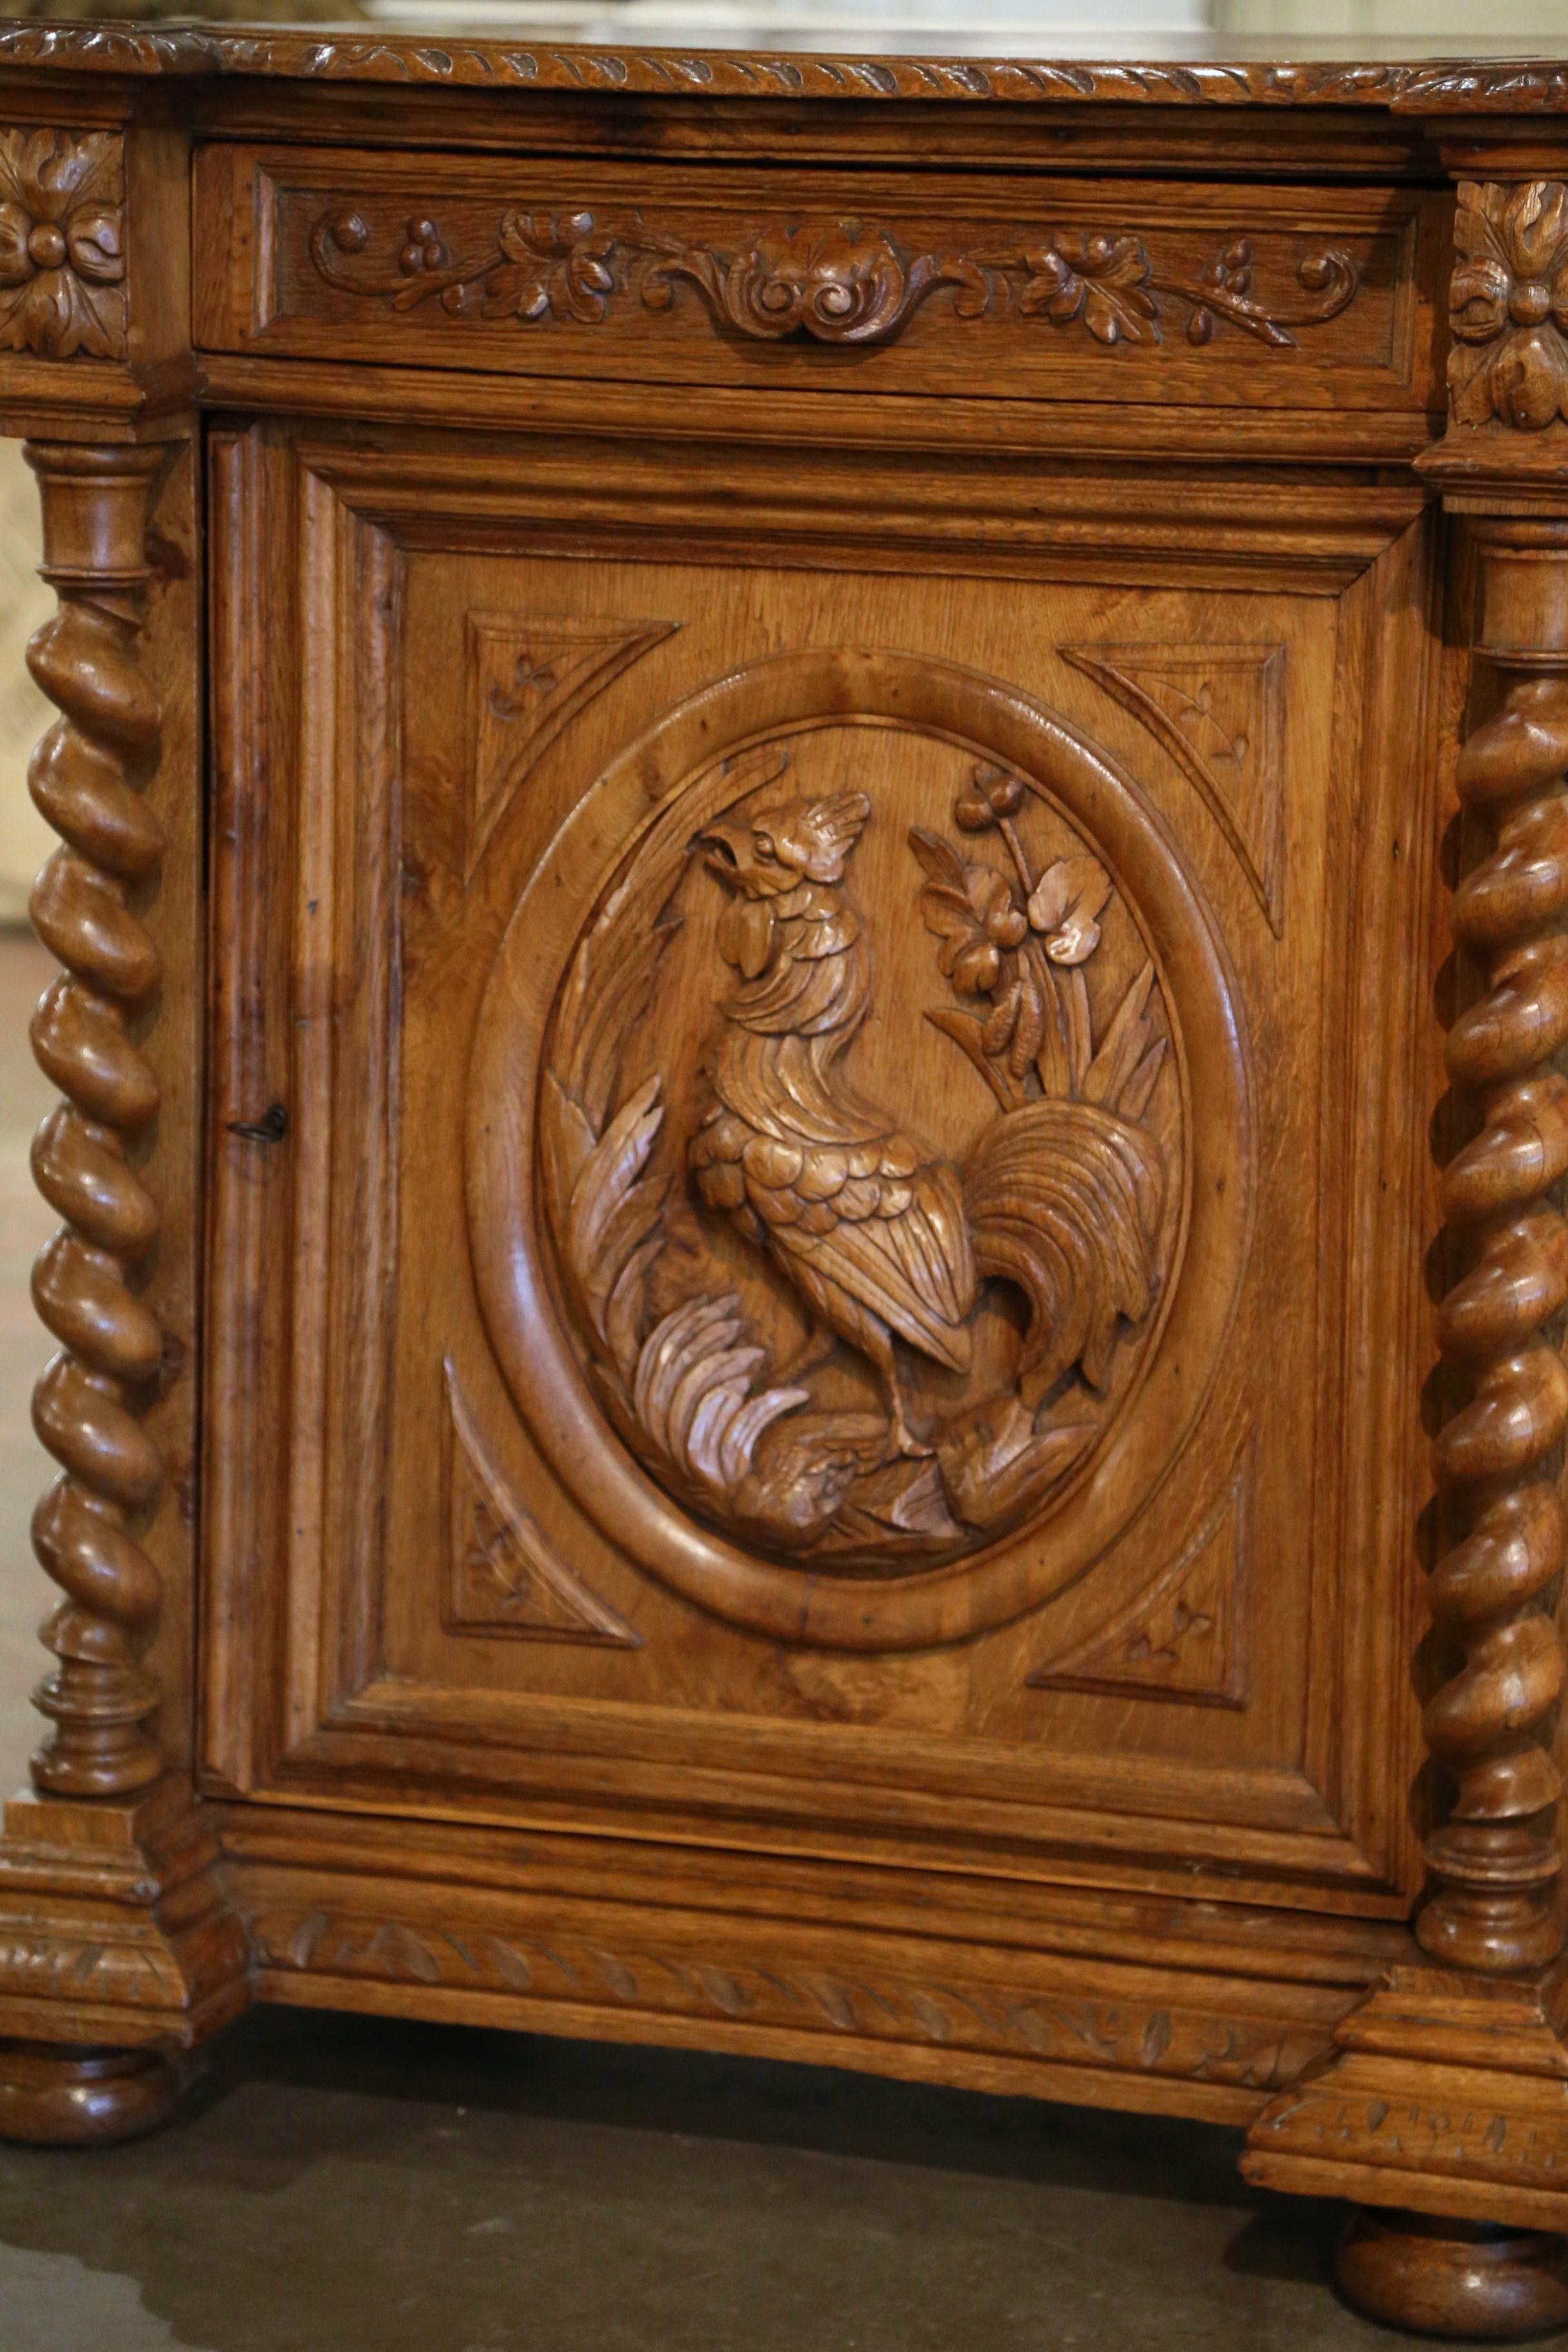 Hand-Carved 19th Century French Louis XIII Oak Barley Twist Jelly Cabinet with Rooster Motif For Sale